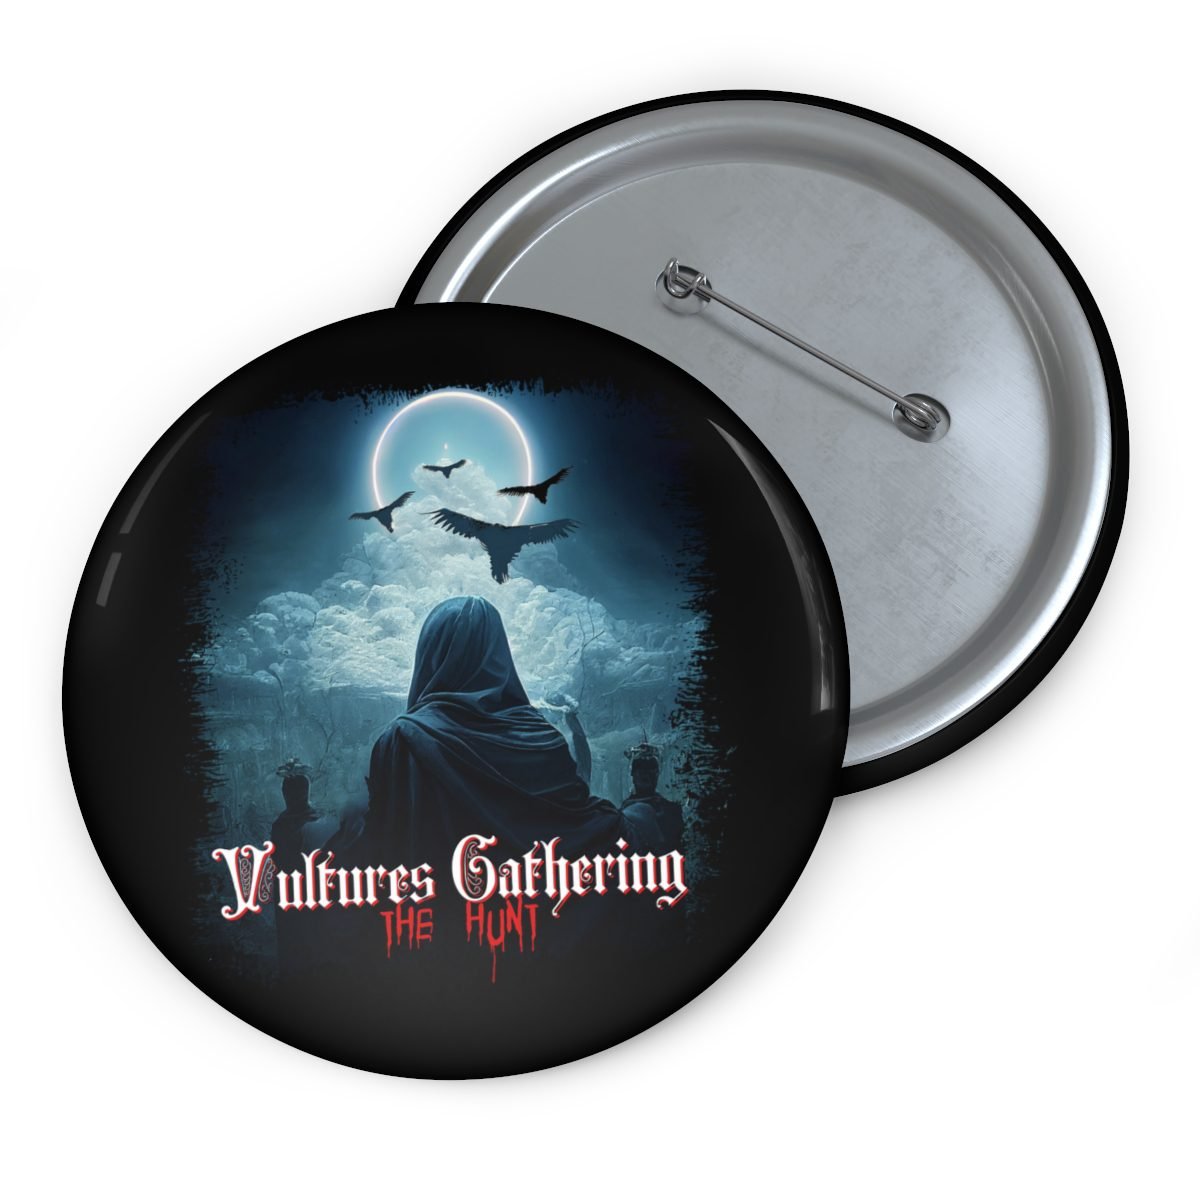 Vultures Gathering – The Hunt Pin Buttons